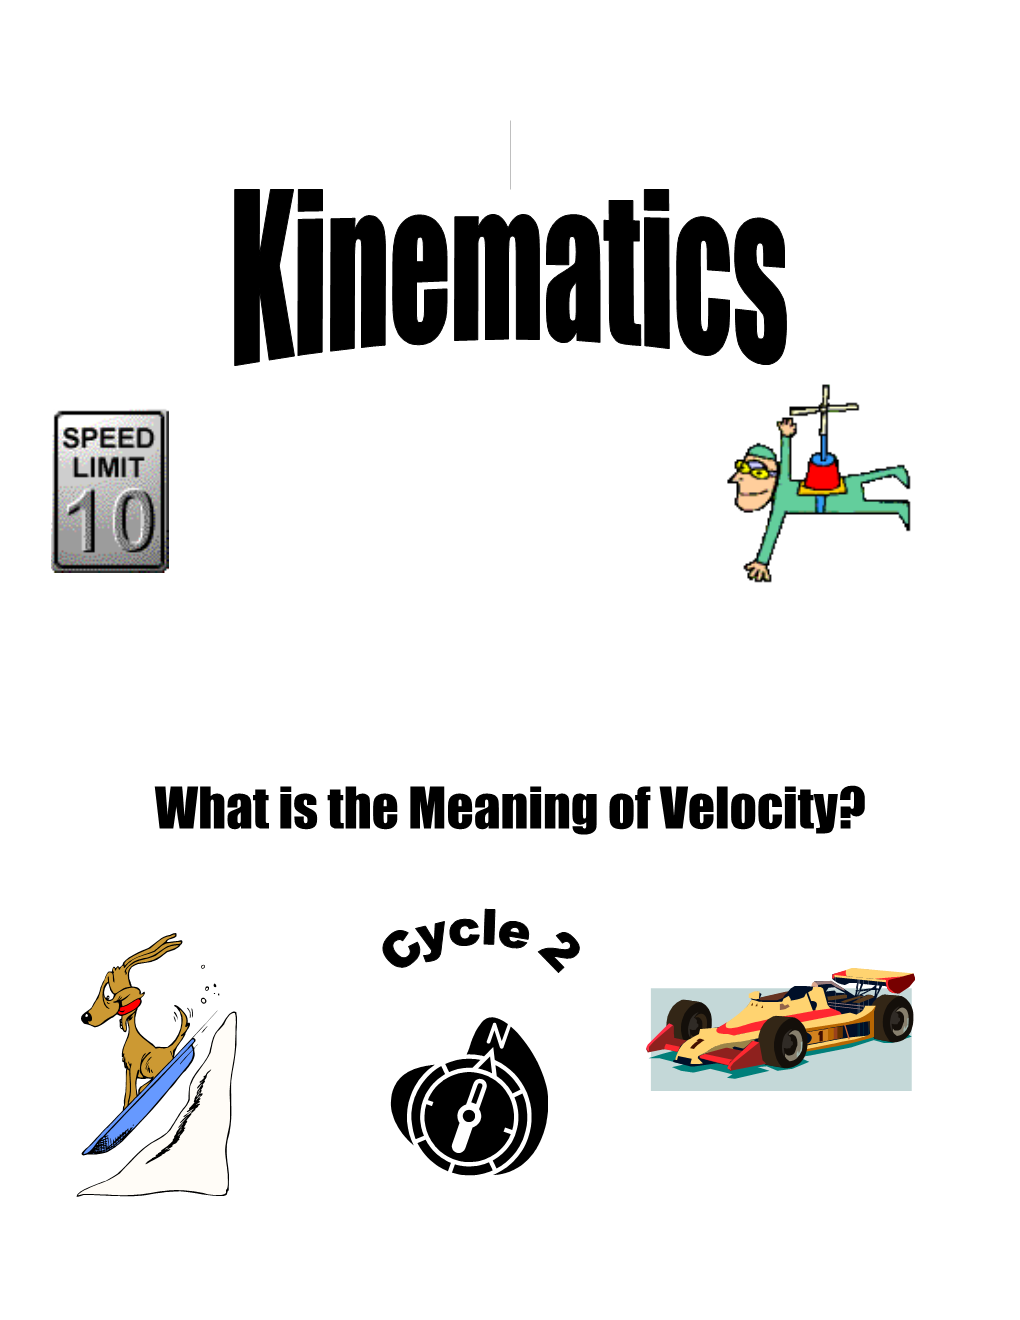 What Is the Meaning of Velocity?